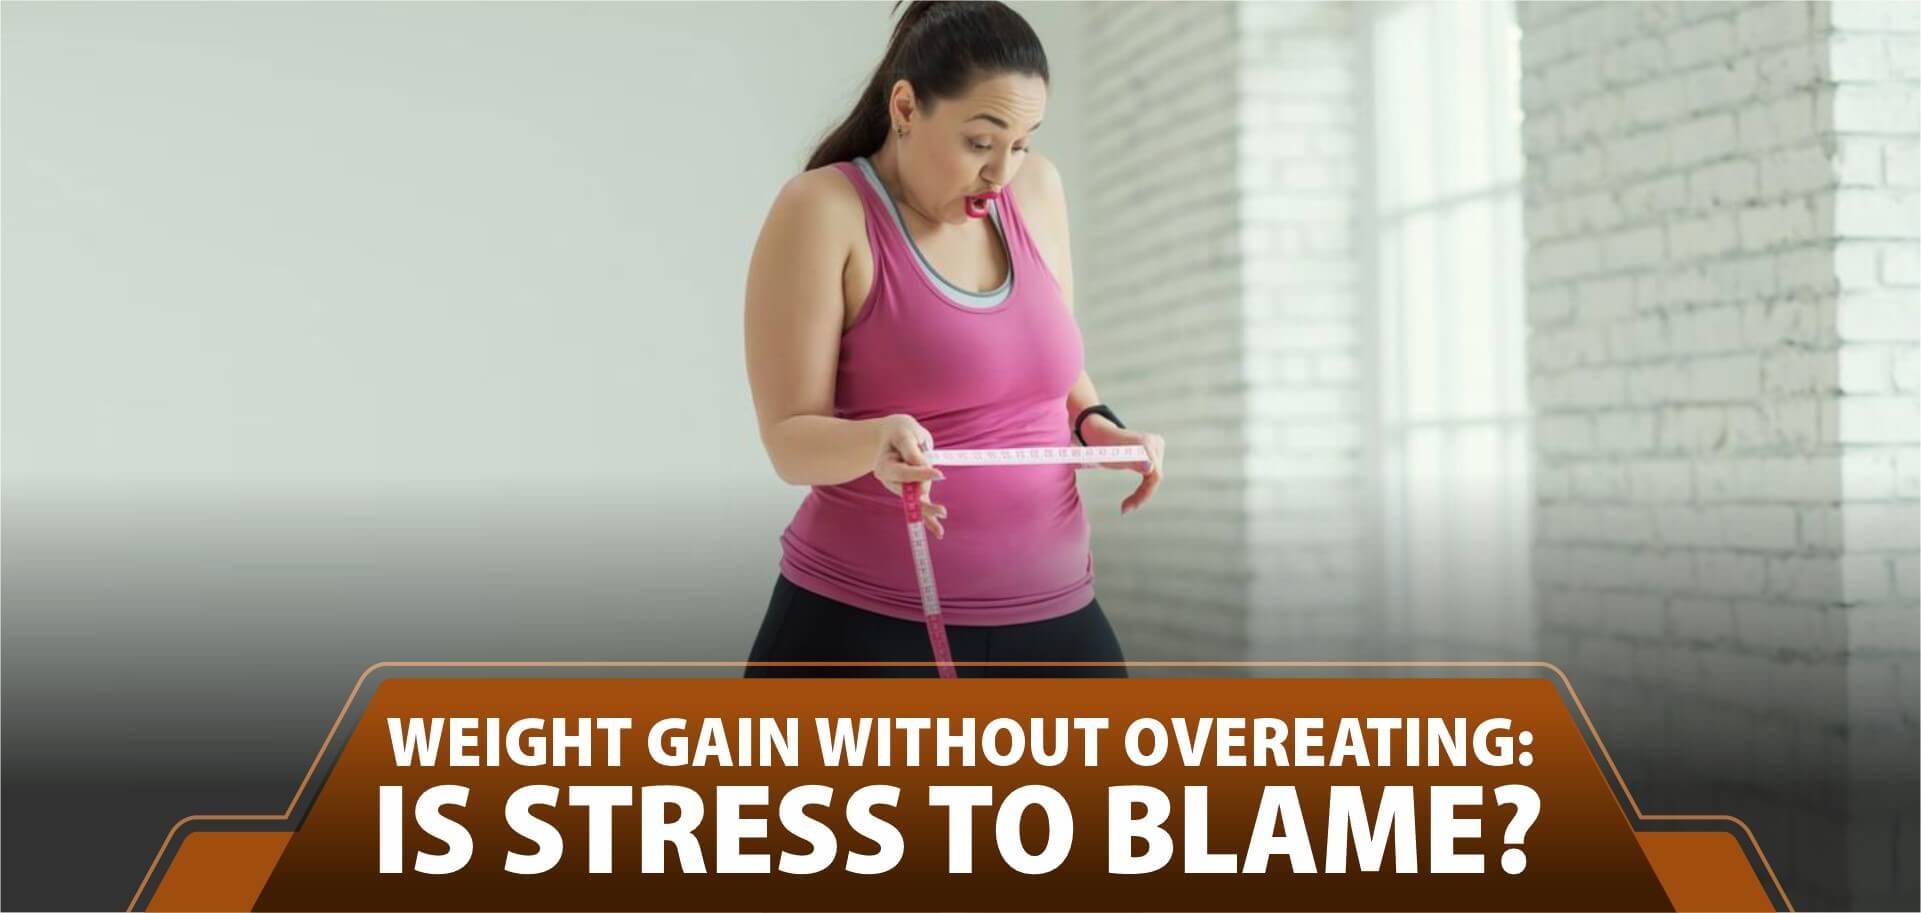 Weight gain without overeating